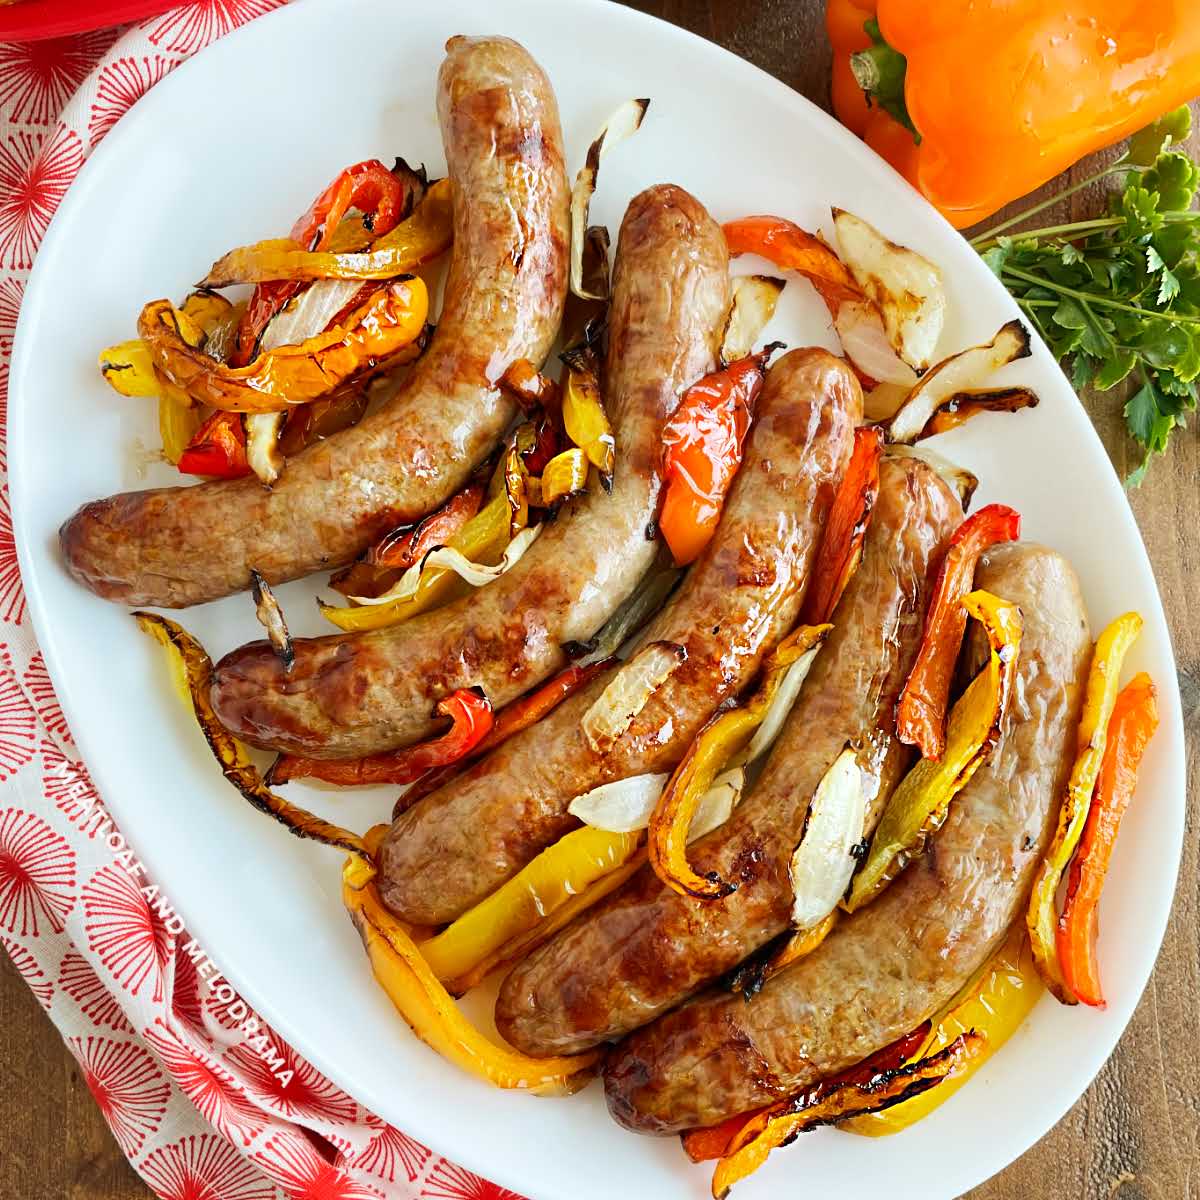 https://www.meatloafandmelodrama.com/wp-content/uploads/2021/07/air-fryer-sausage-and-peppers-square-2.jpeg